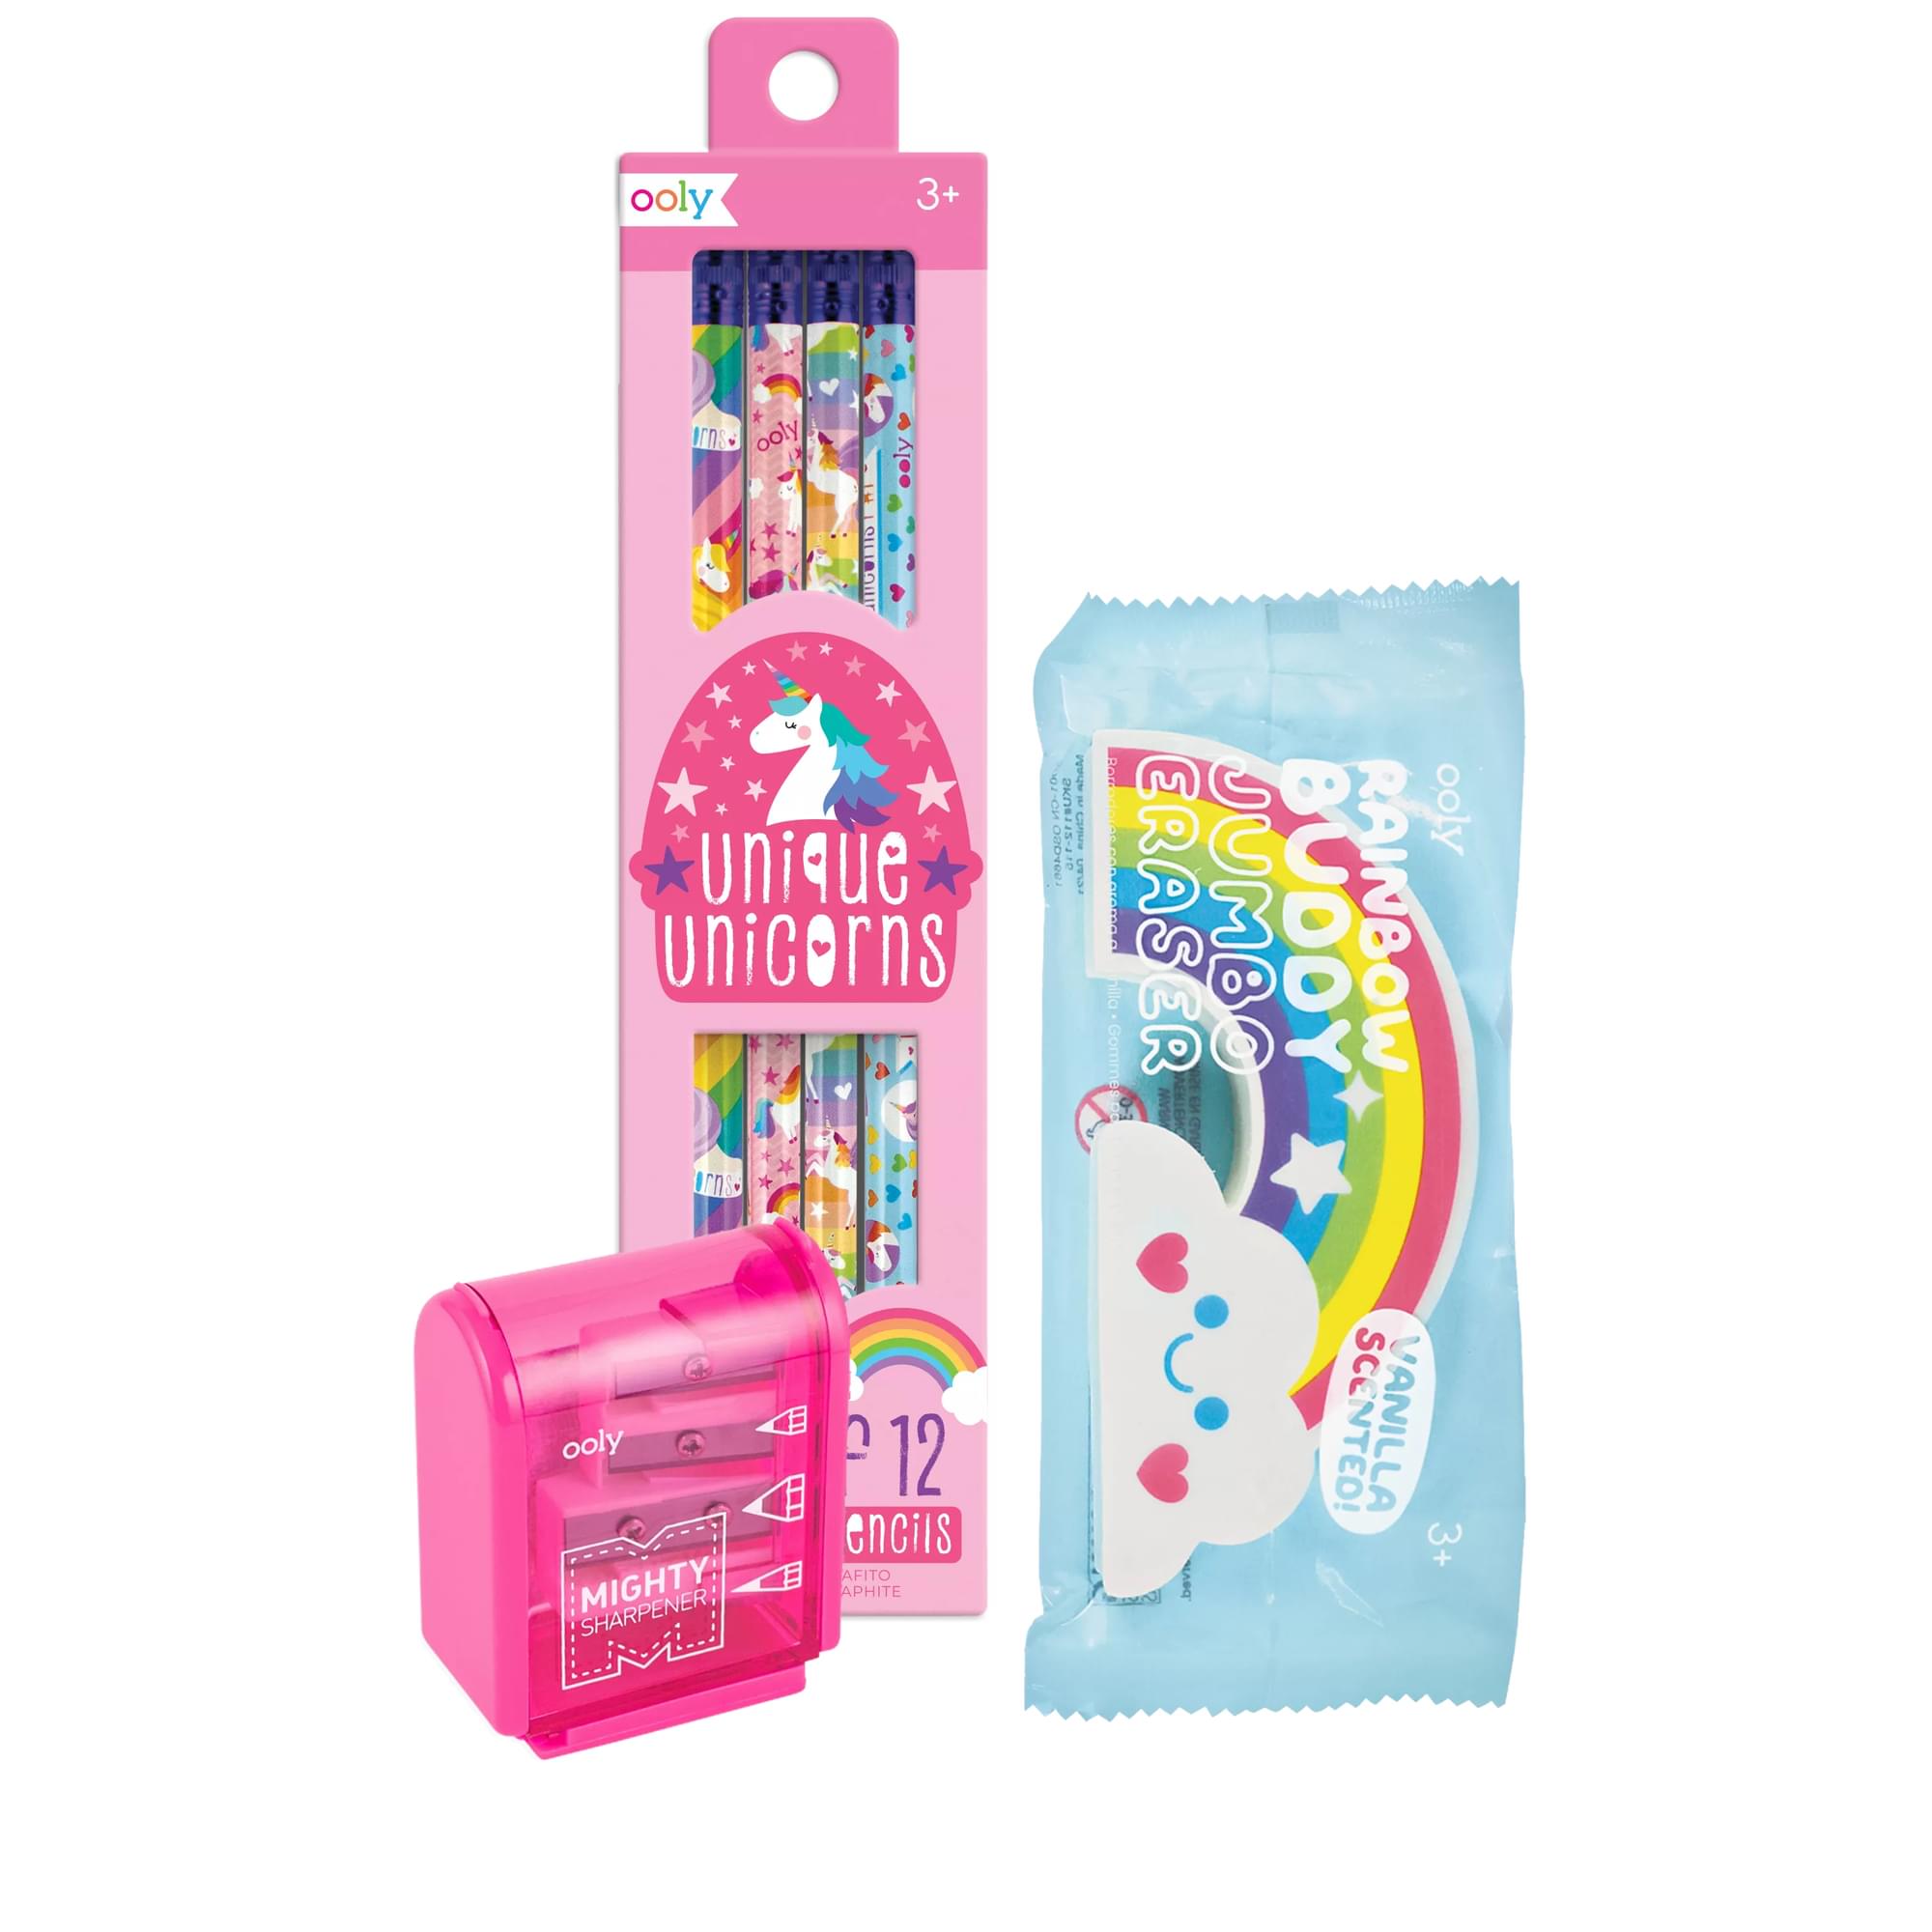 OOLY Unicorn Happy pack contents with graphite pencils, pencil sharpener and rainbow eraser